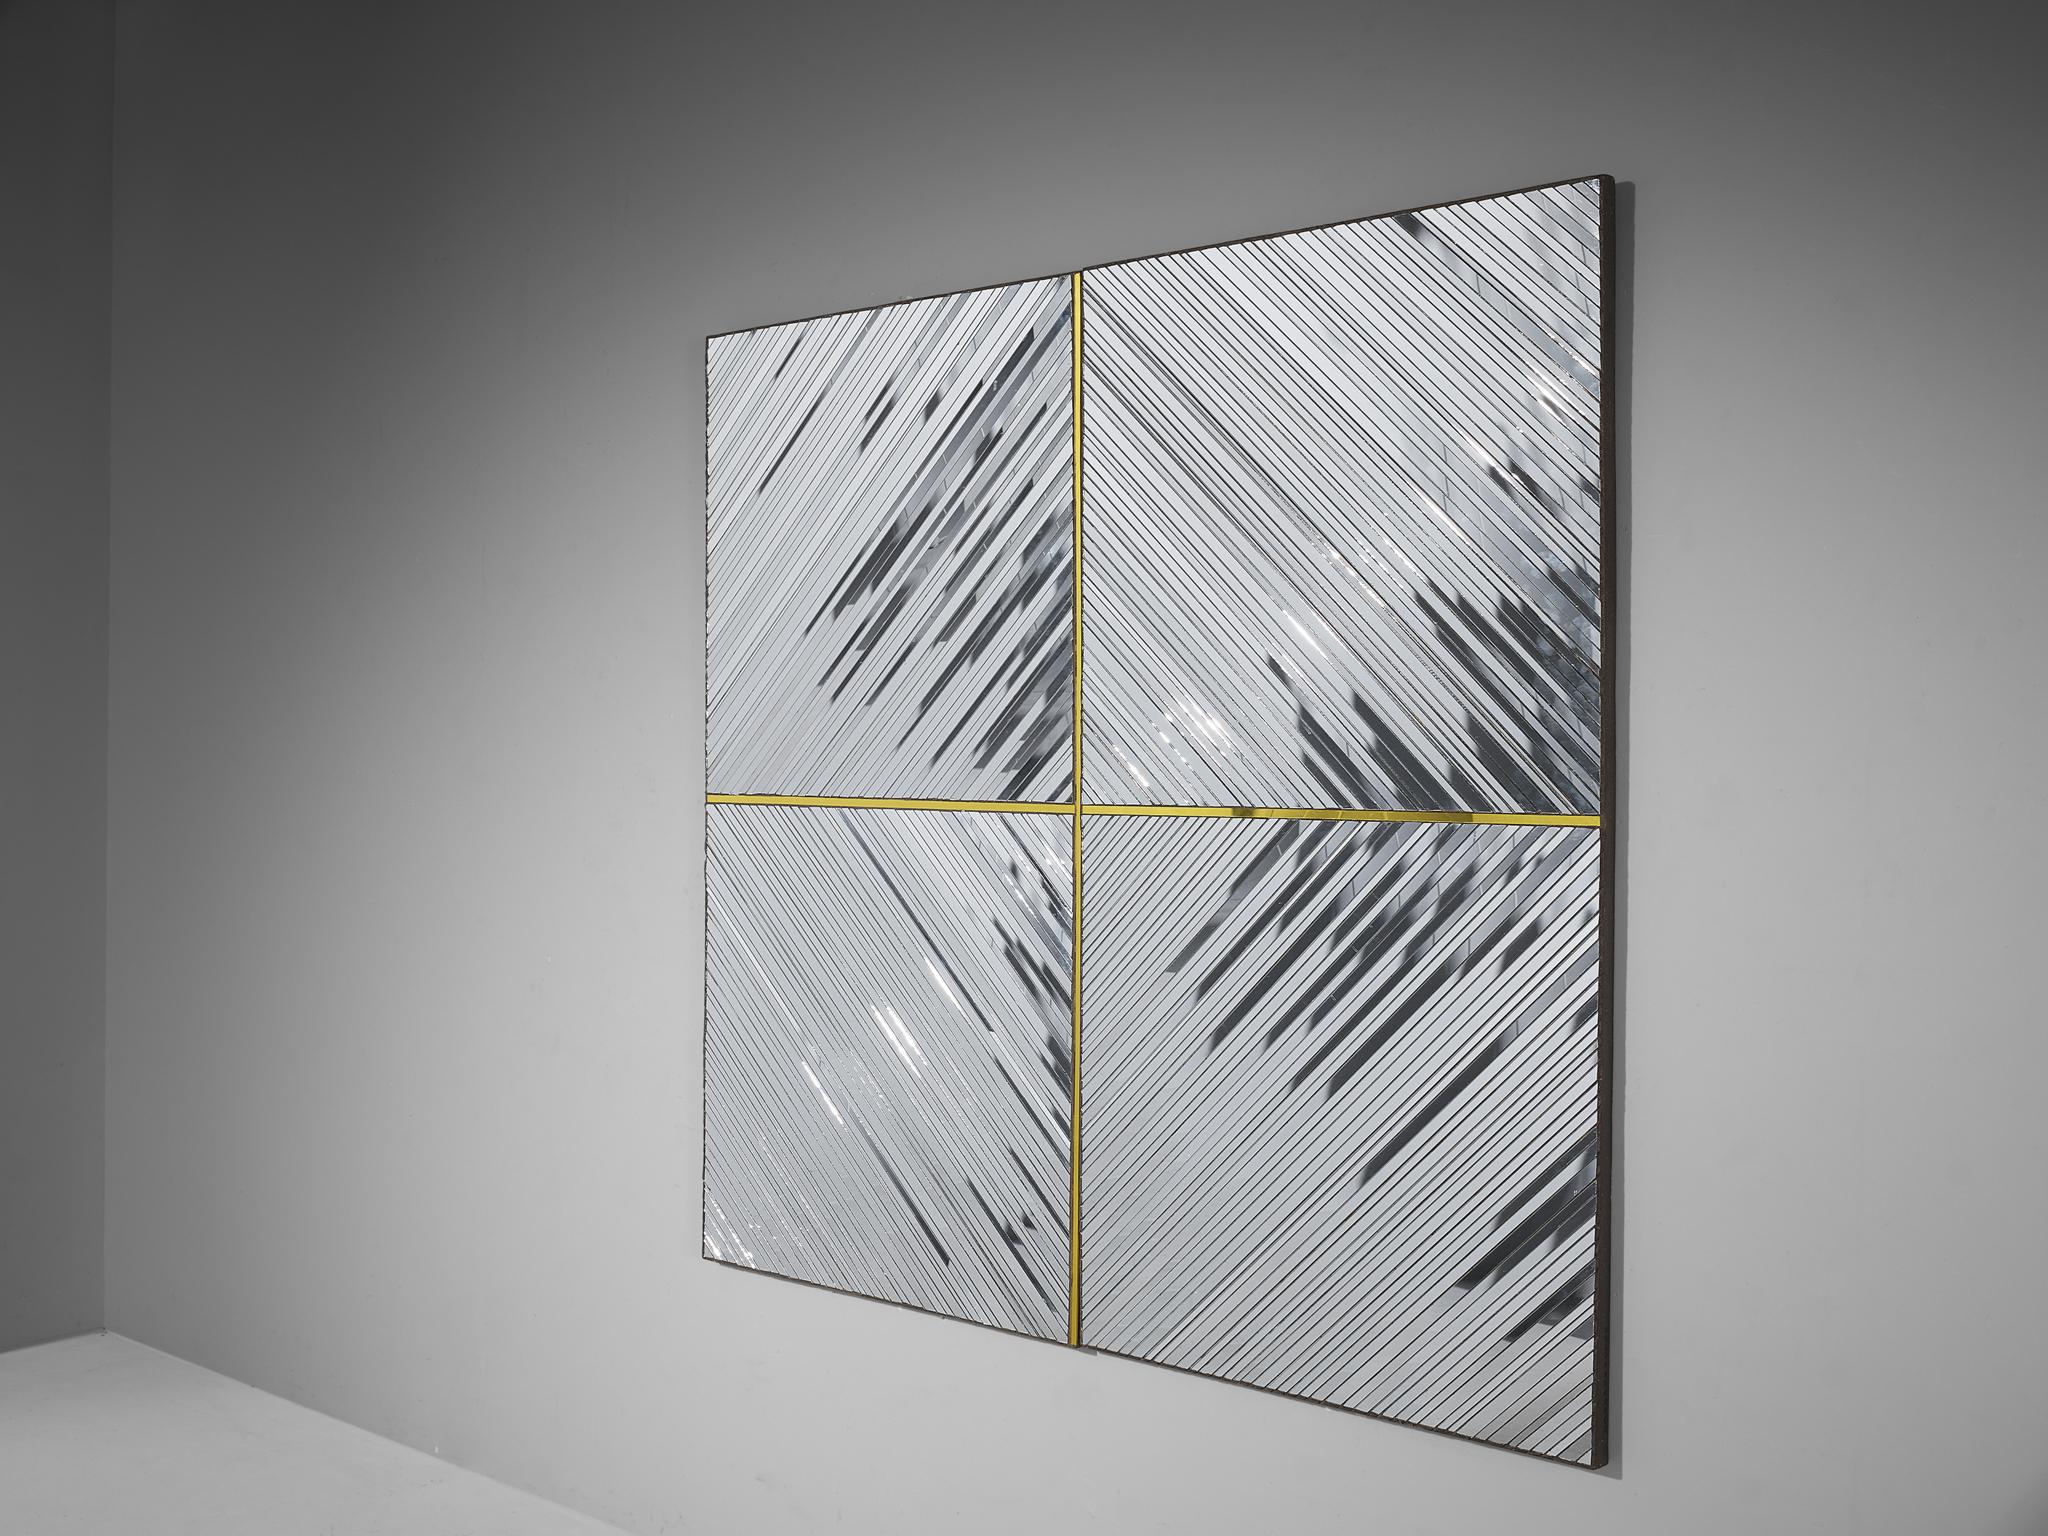 Michel Martens, relief mirror, glass, fixation structure, Belgium, 1985

Expressive wall art by Belgian designer Michel Martens designed in 1985. Martens, who is known for colorful glass windows as well as his art with mirrored glass, created